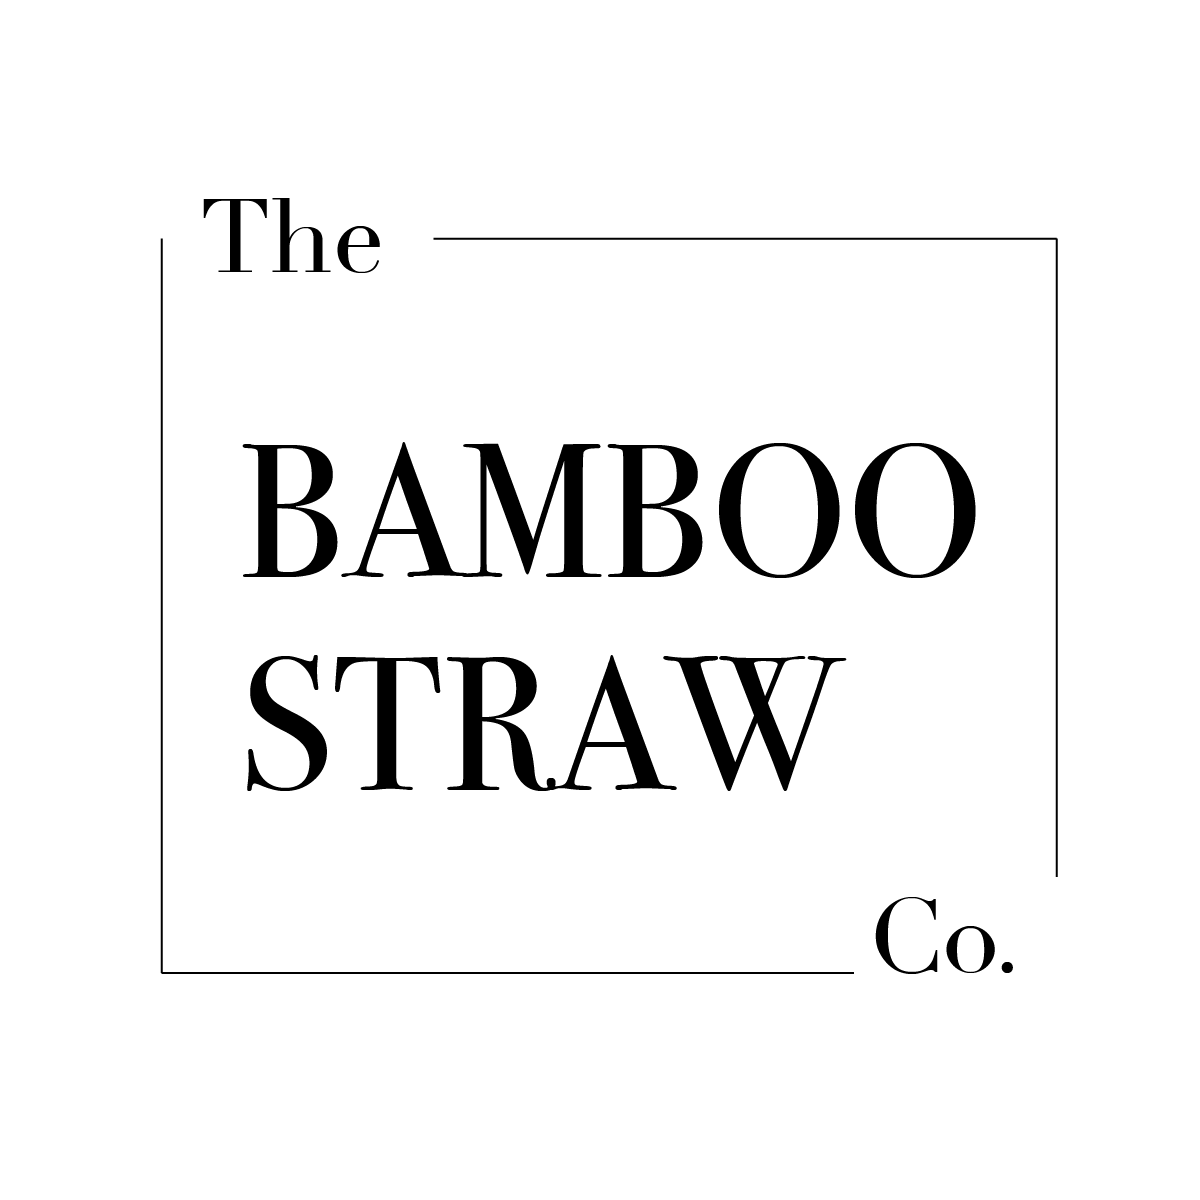 THE BAMBOO STRAW CO.